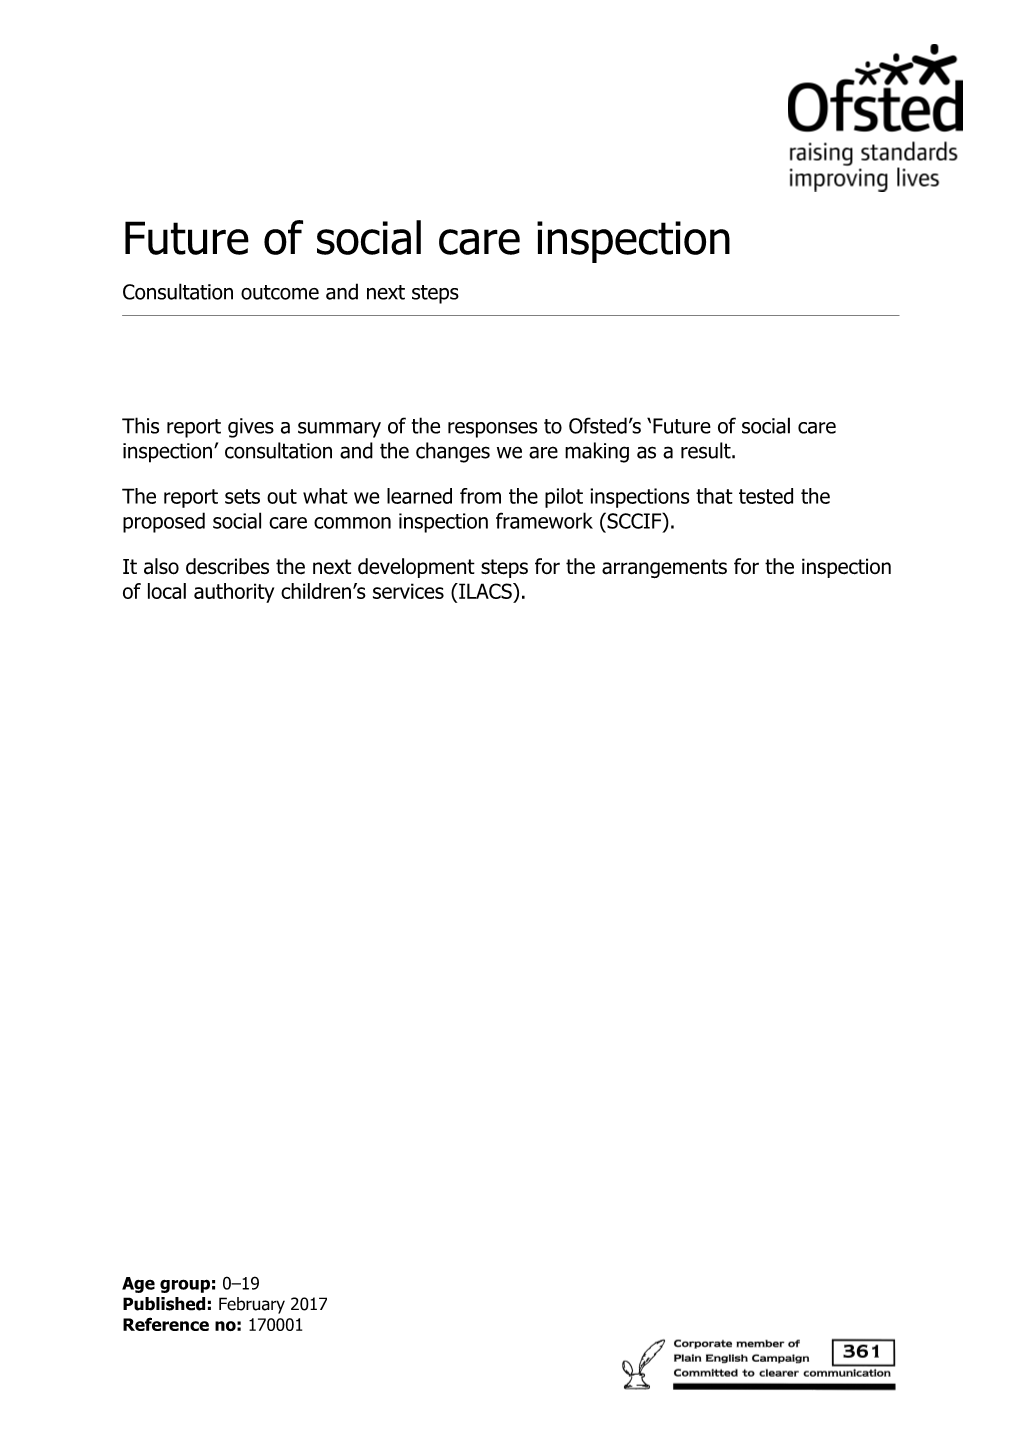 Future of Social Care Inspection - Consultation Outcomes - Ready for 2Nd Edit